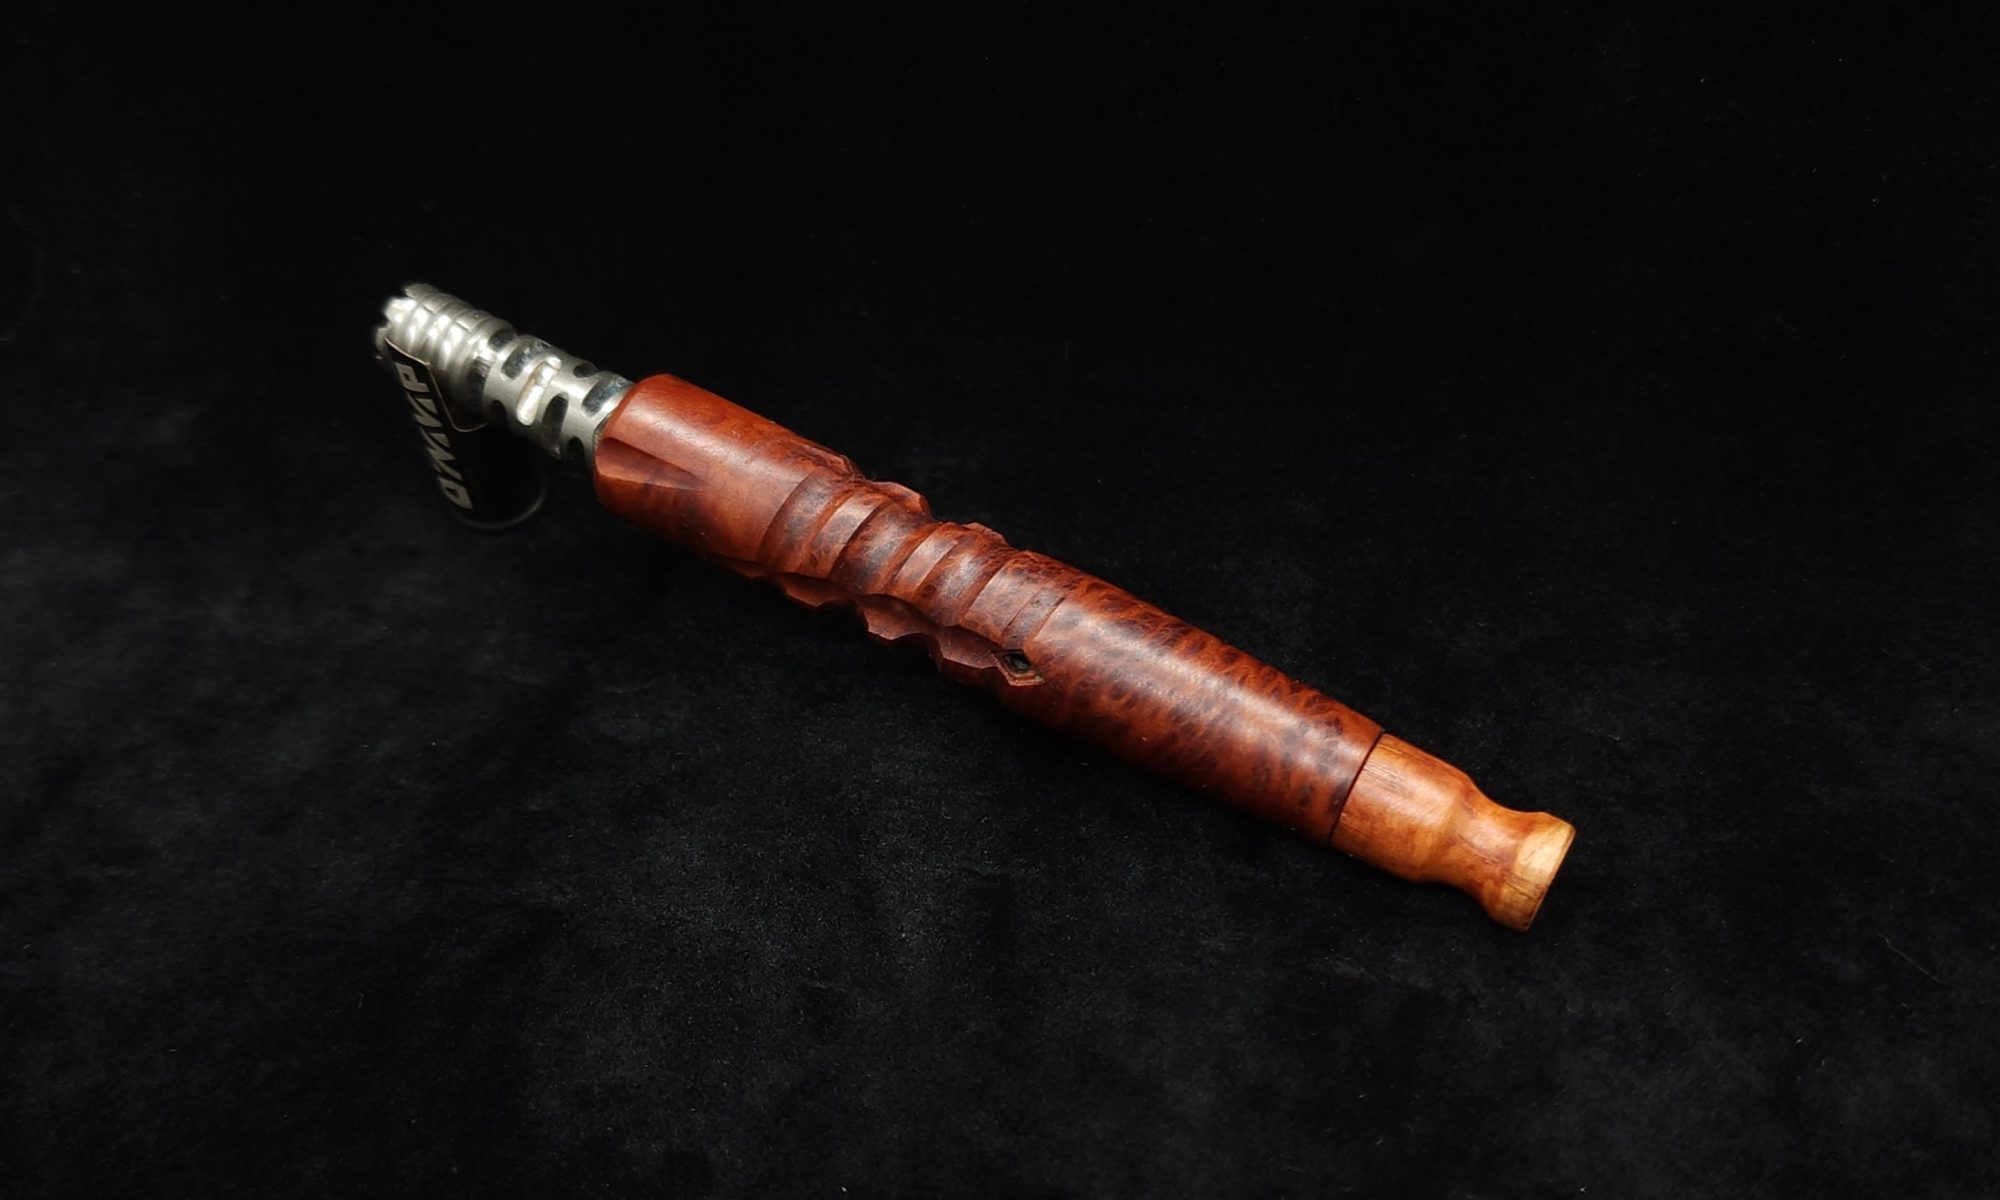 This image portrays Downward Spiral XL-Red Malle Burl + Mouthpiece-Dynavap Stem by Dovetail Woodwork.